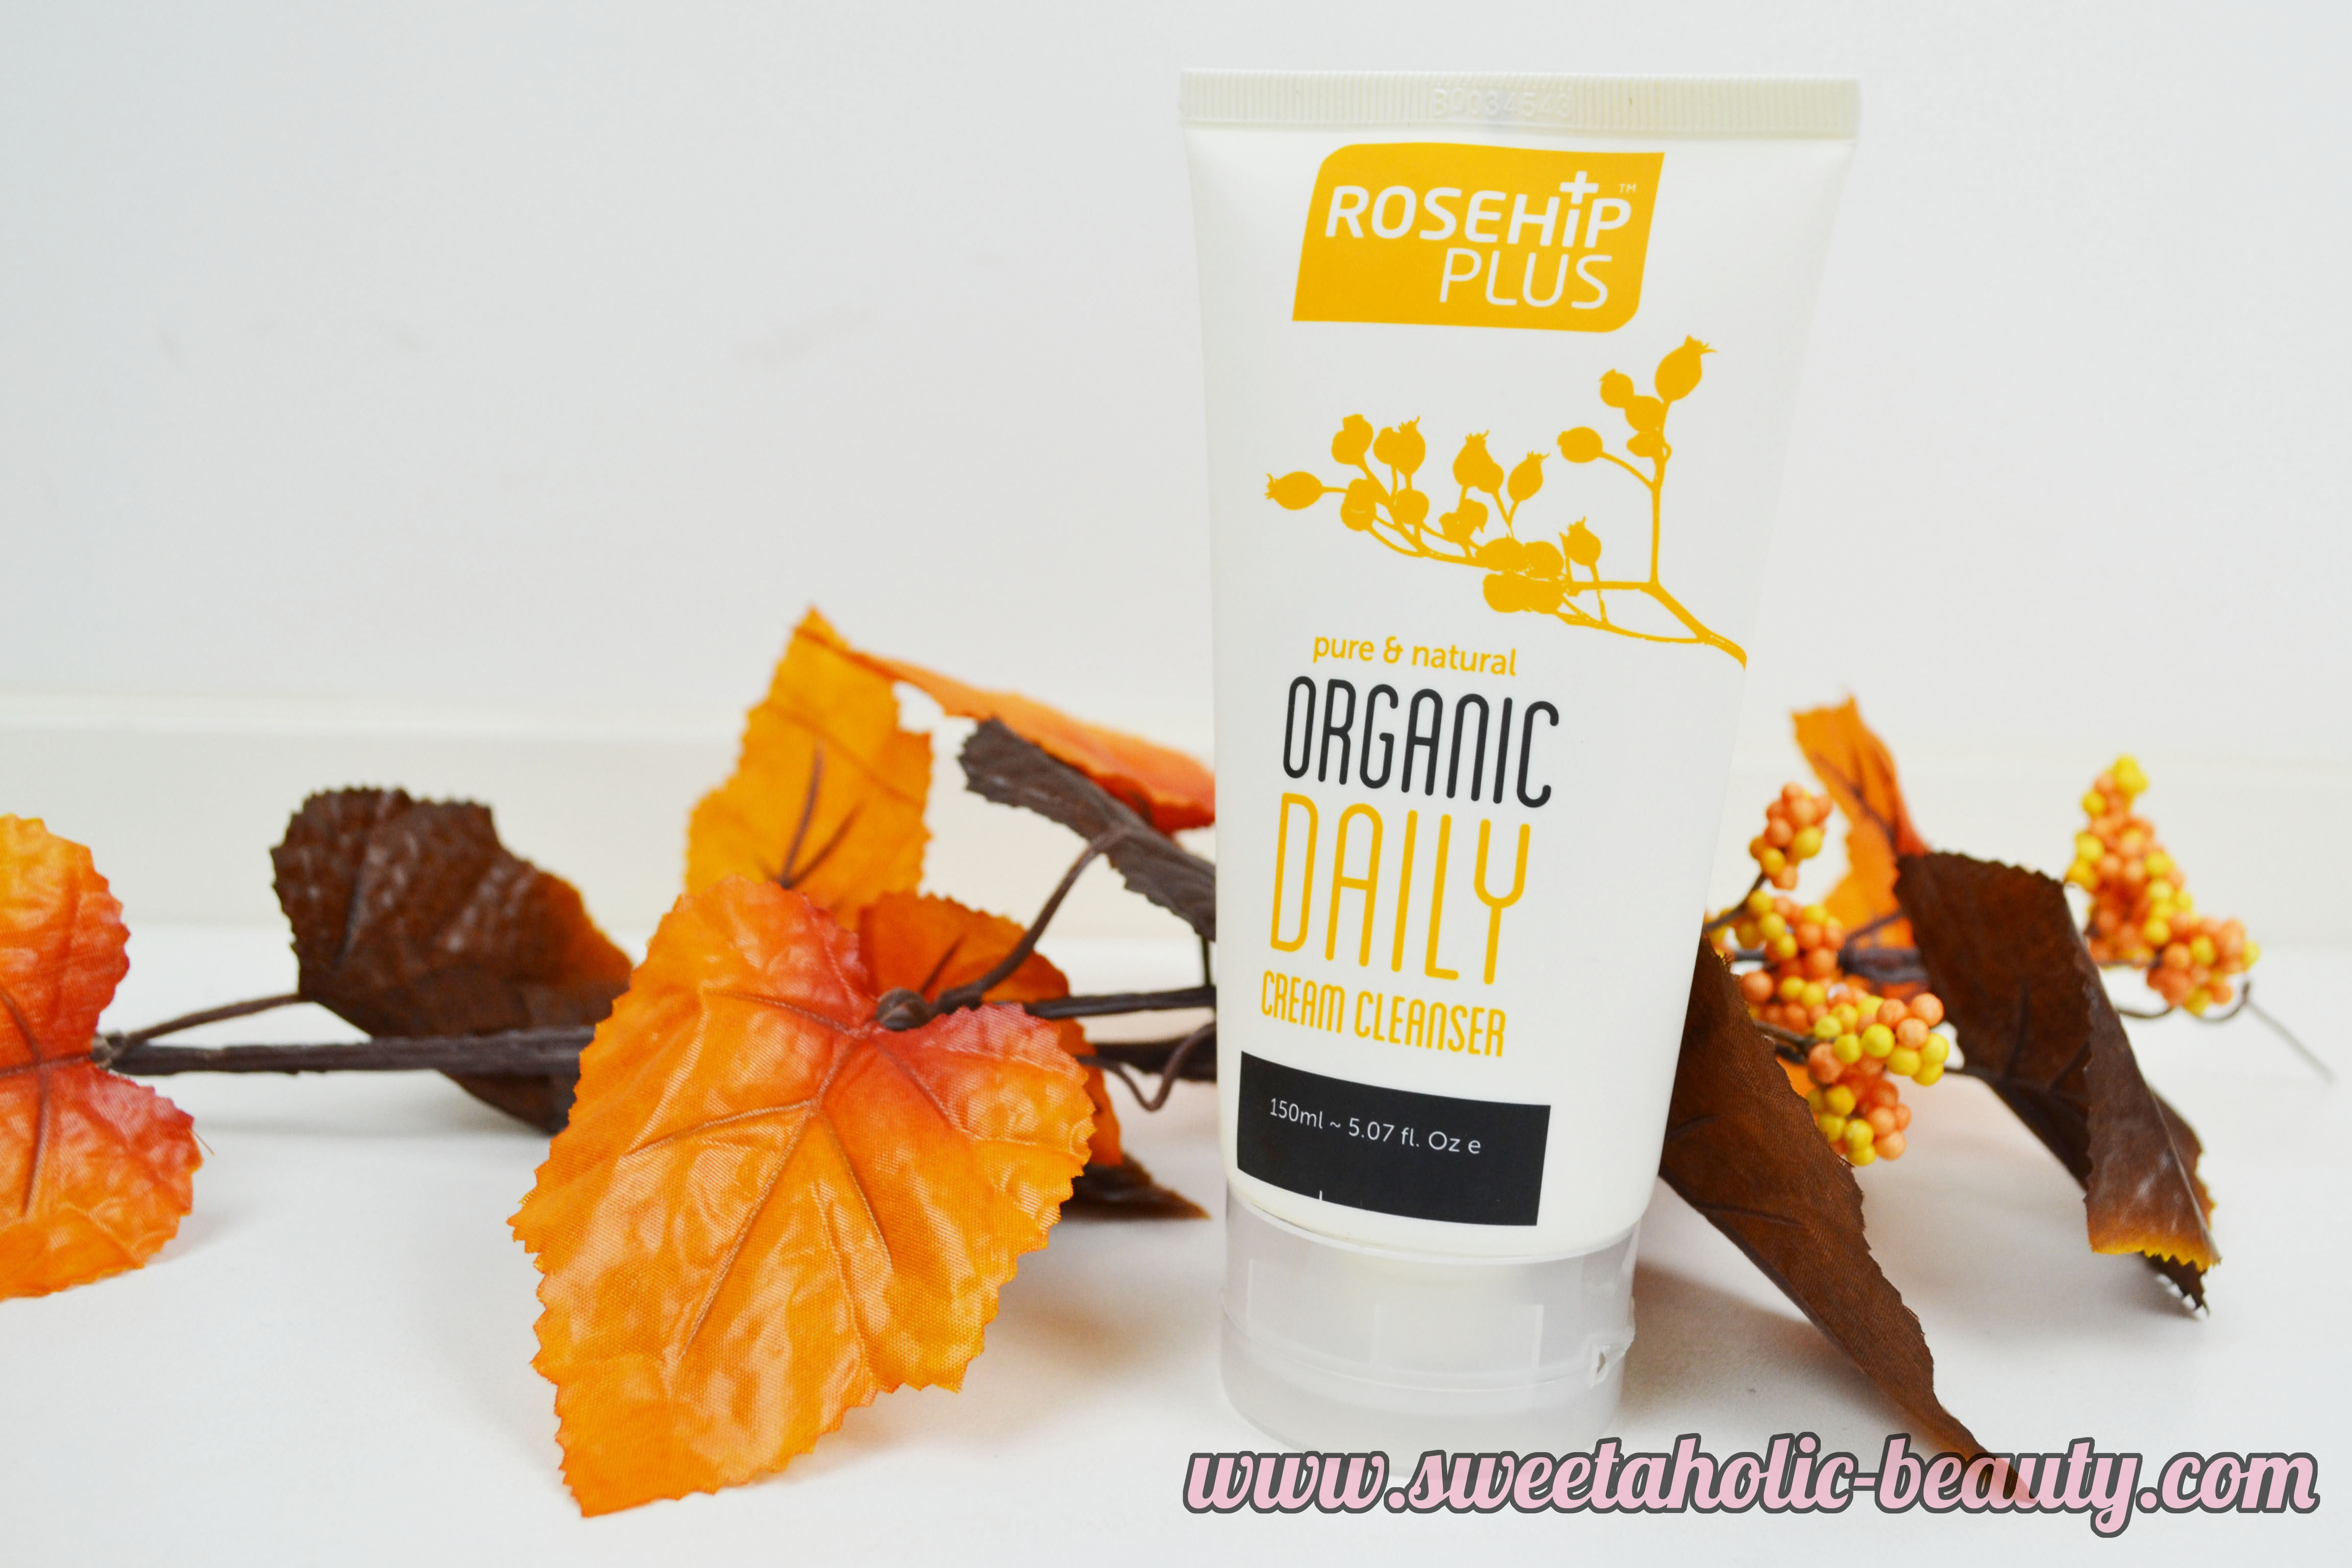 Rosehip Plus Organic Daily Cream Cleanser Review - Sweetaholic Beauty